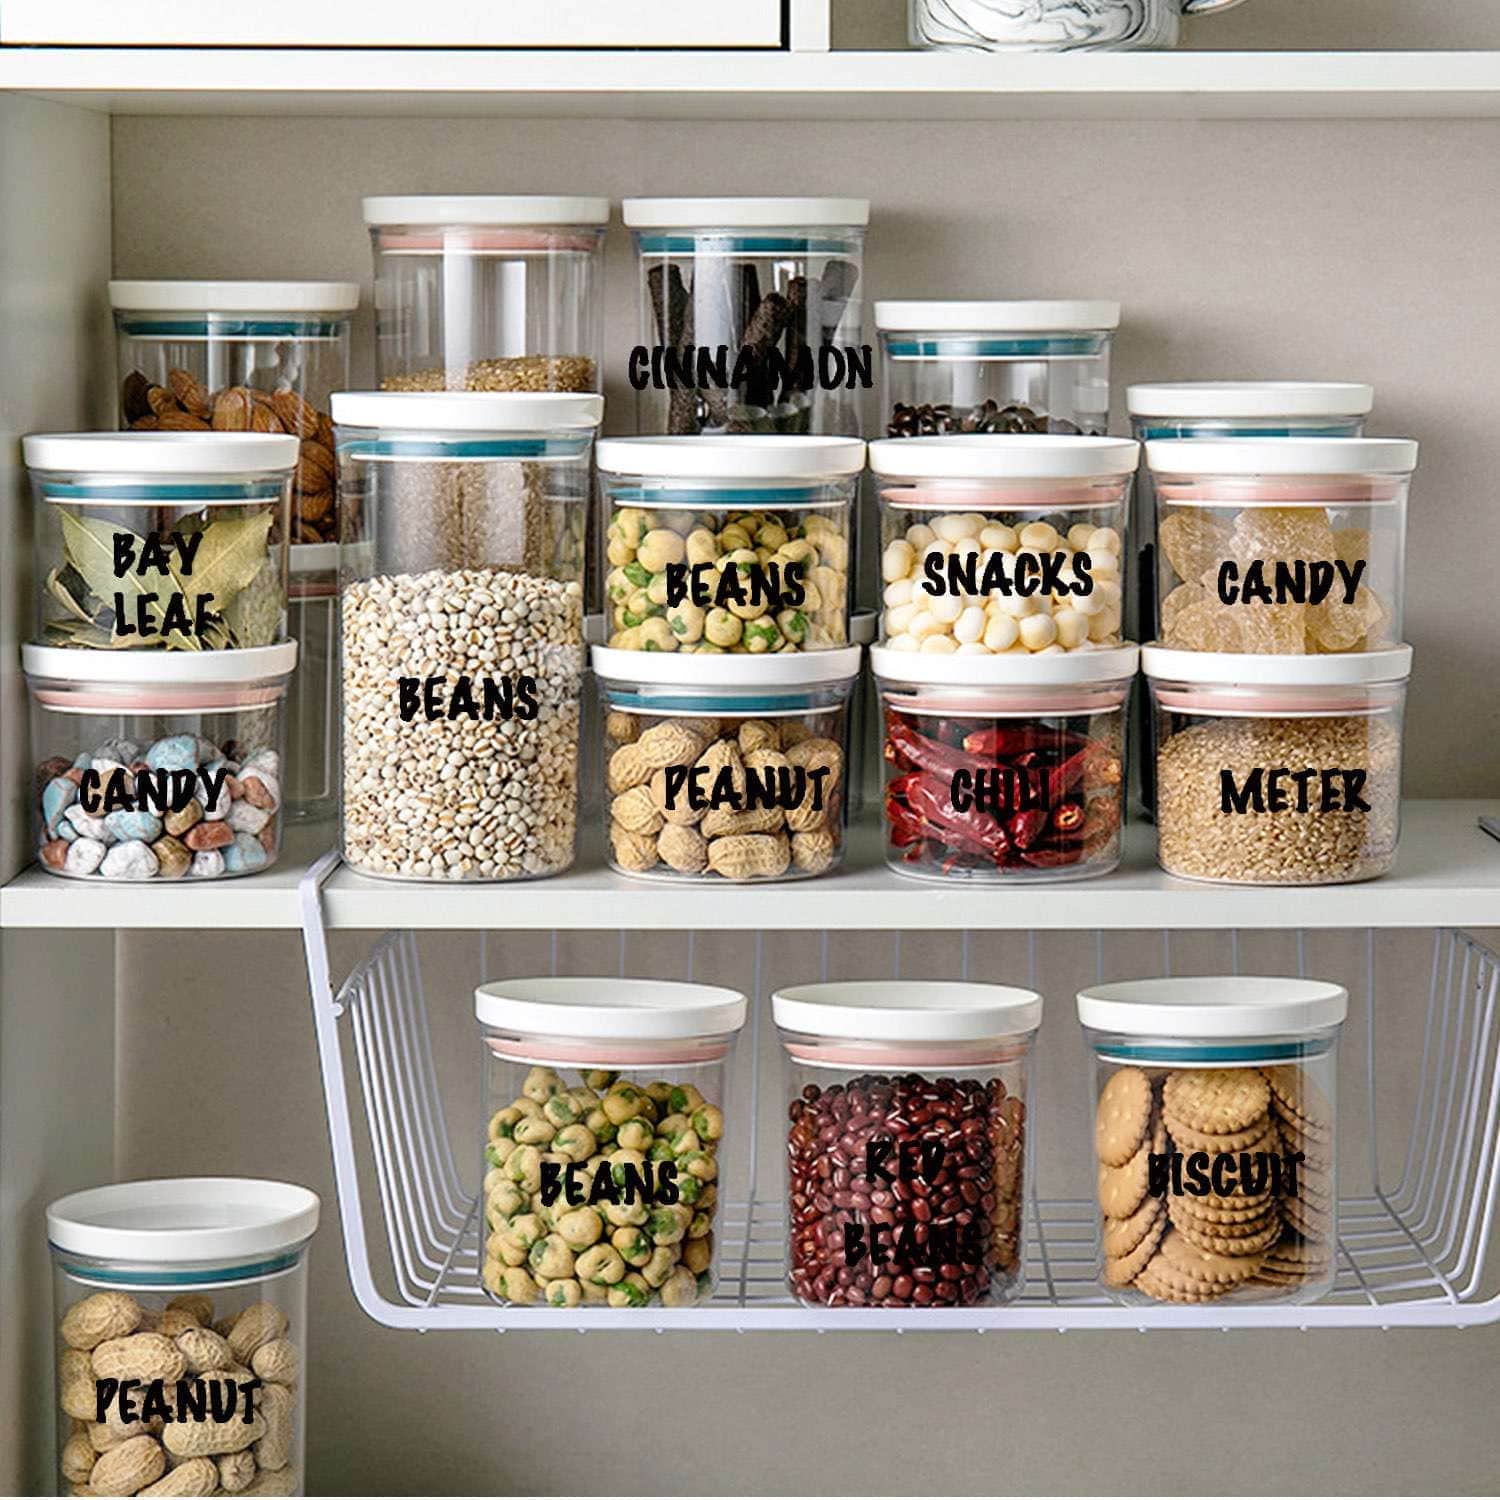 380pcs Transparent Sticker Black Font Label,Water Resistant for Spice Jars ，Great for Spices and Seasonings Set to Organize Your Spice Rack (Does Not Include Jars)